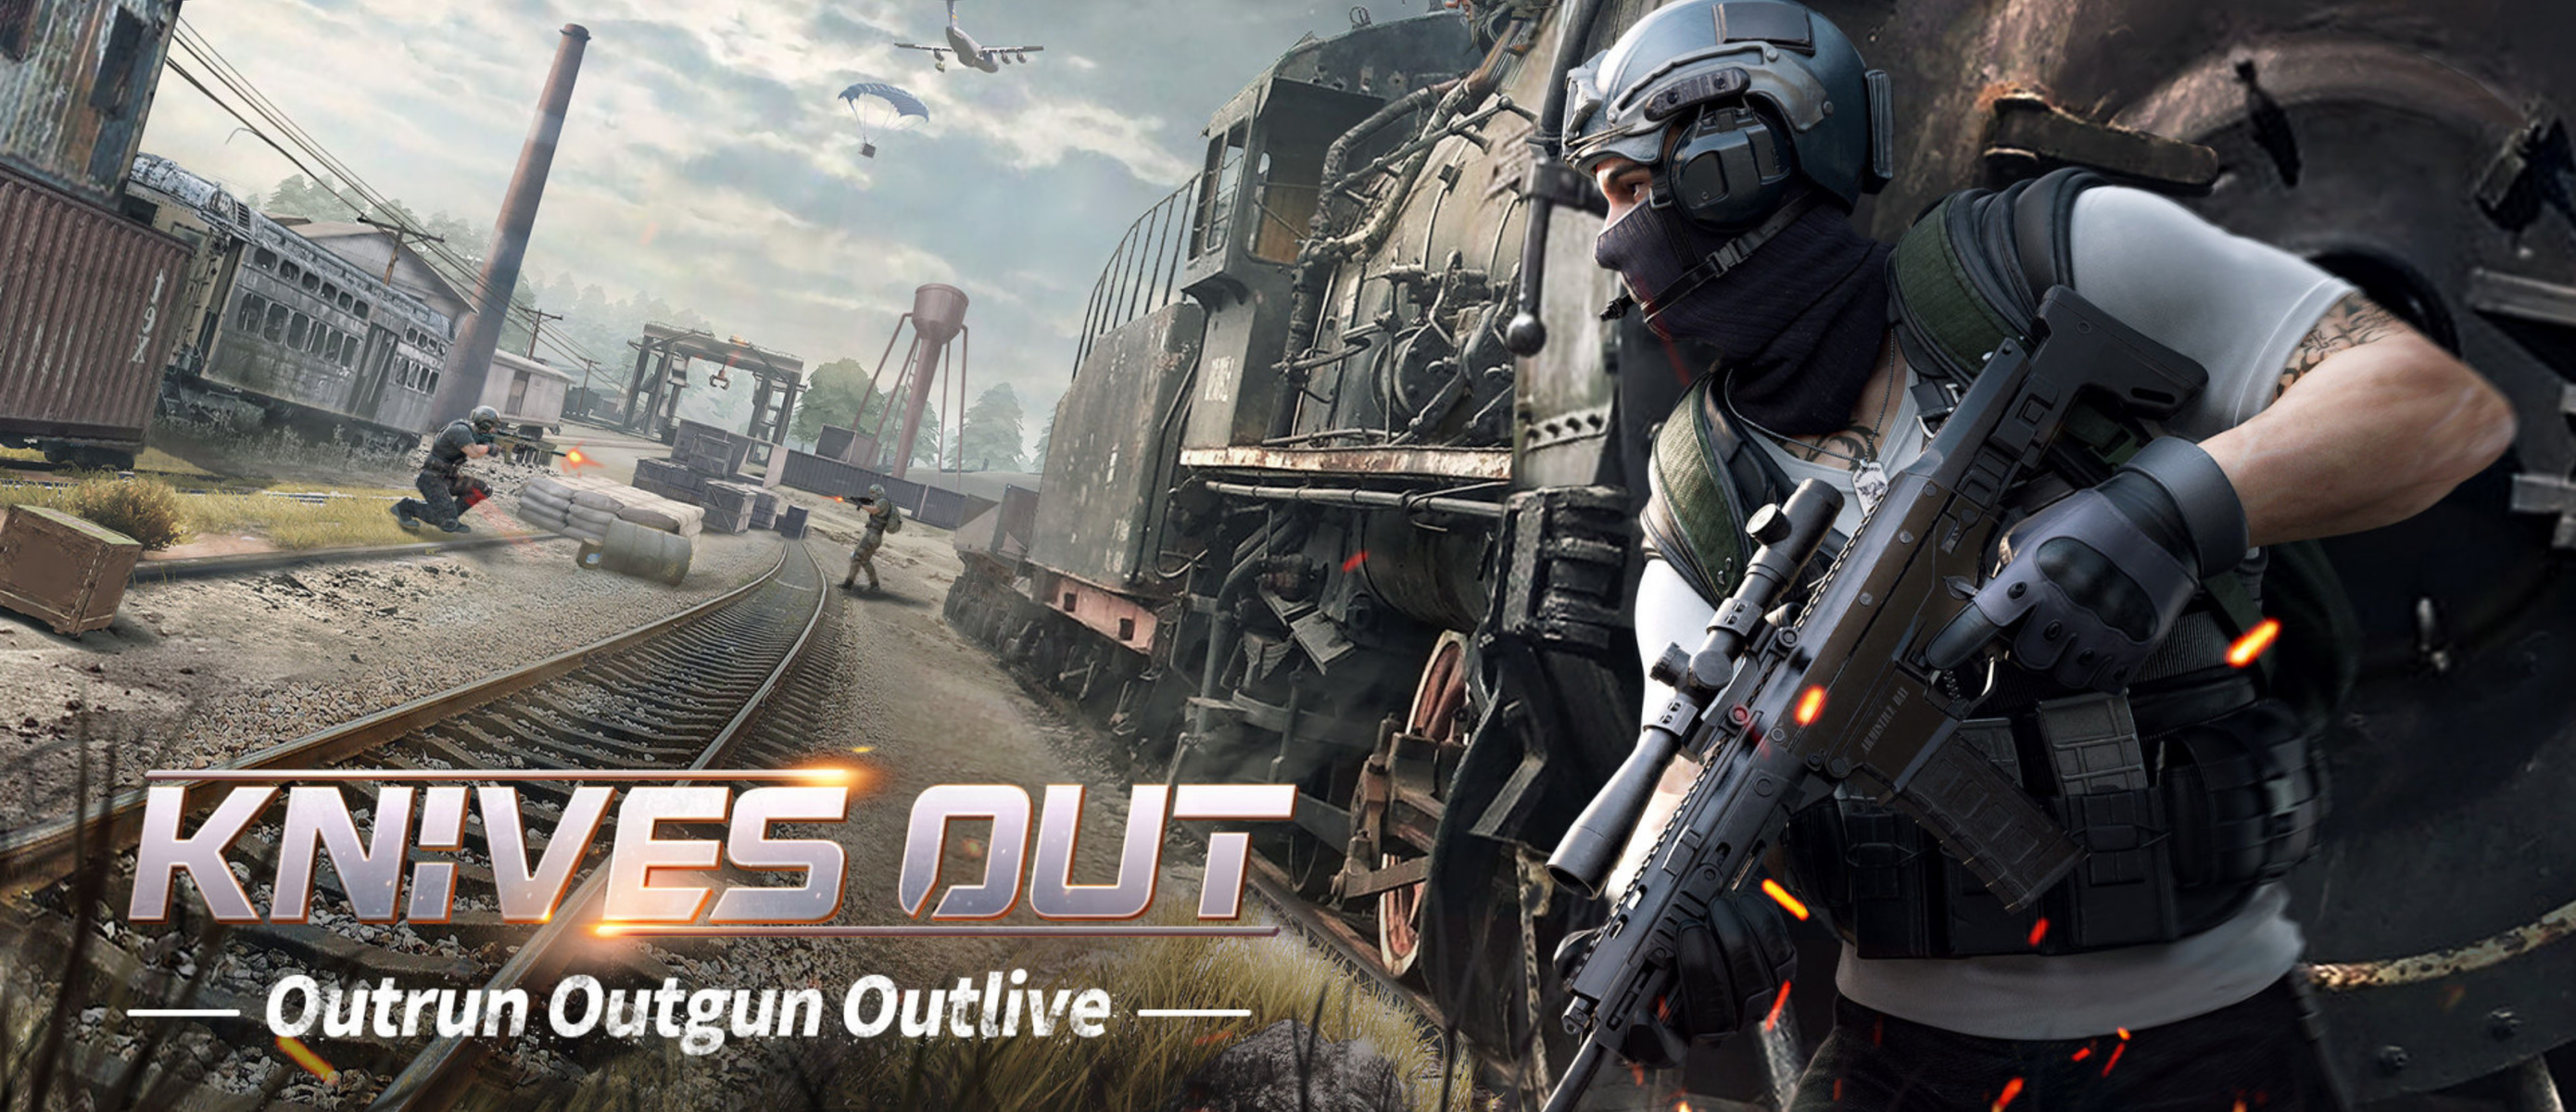 All out game. Knives out игра. Knives out PC. Knives out читы на ПК. Knives out прохождение.